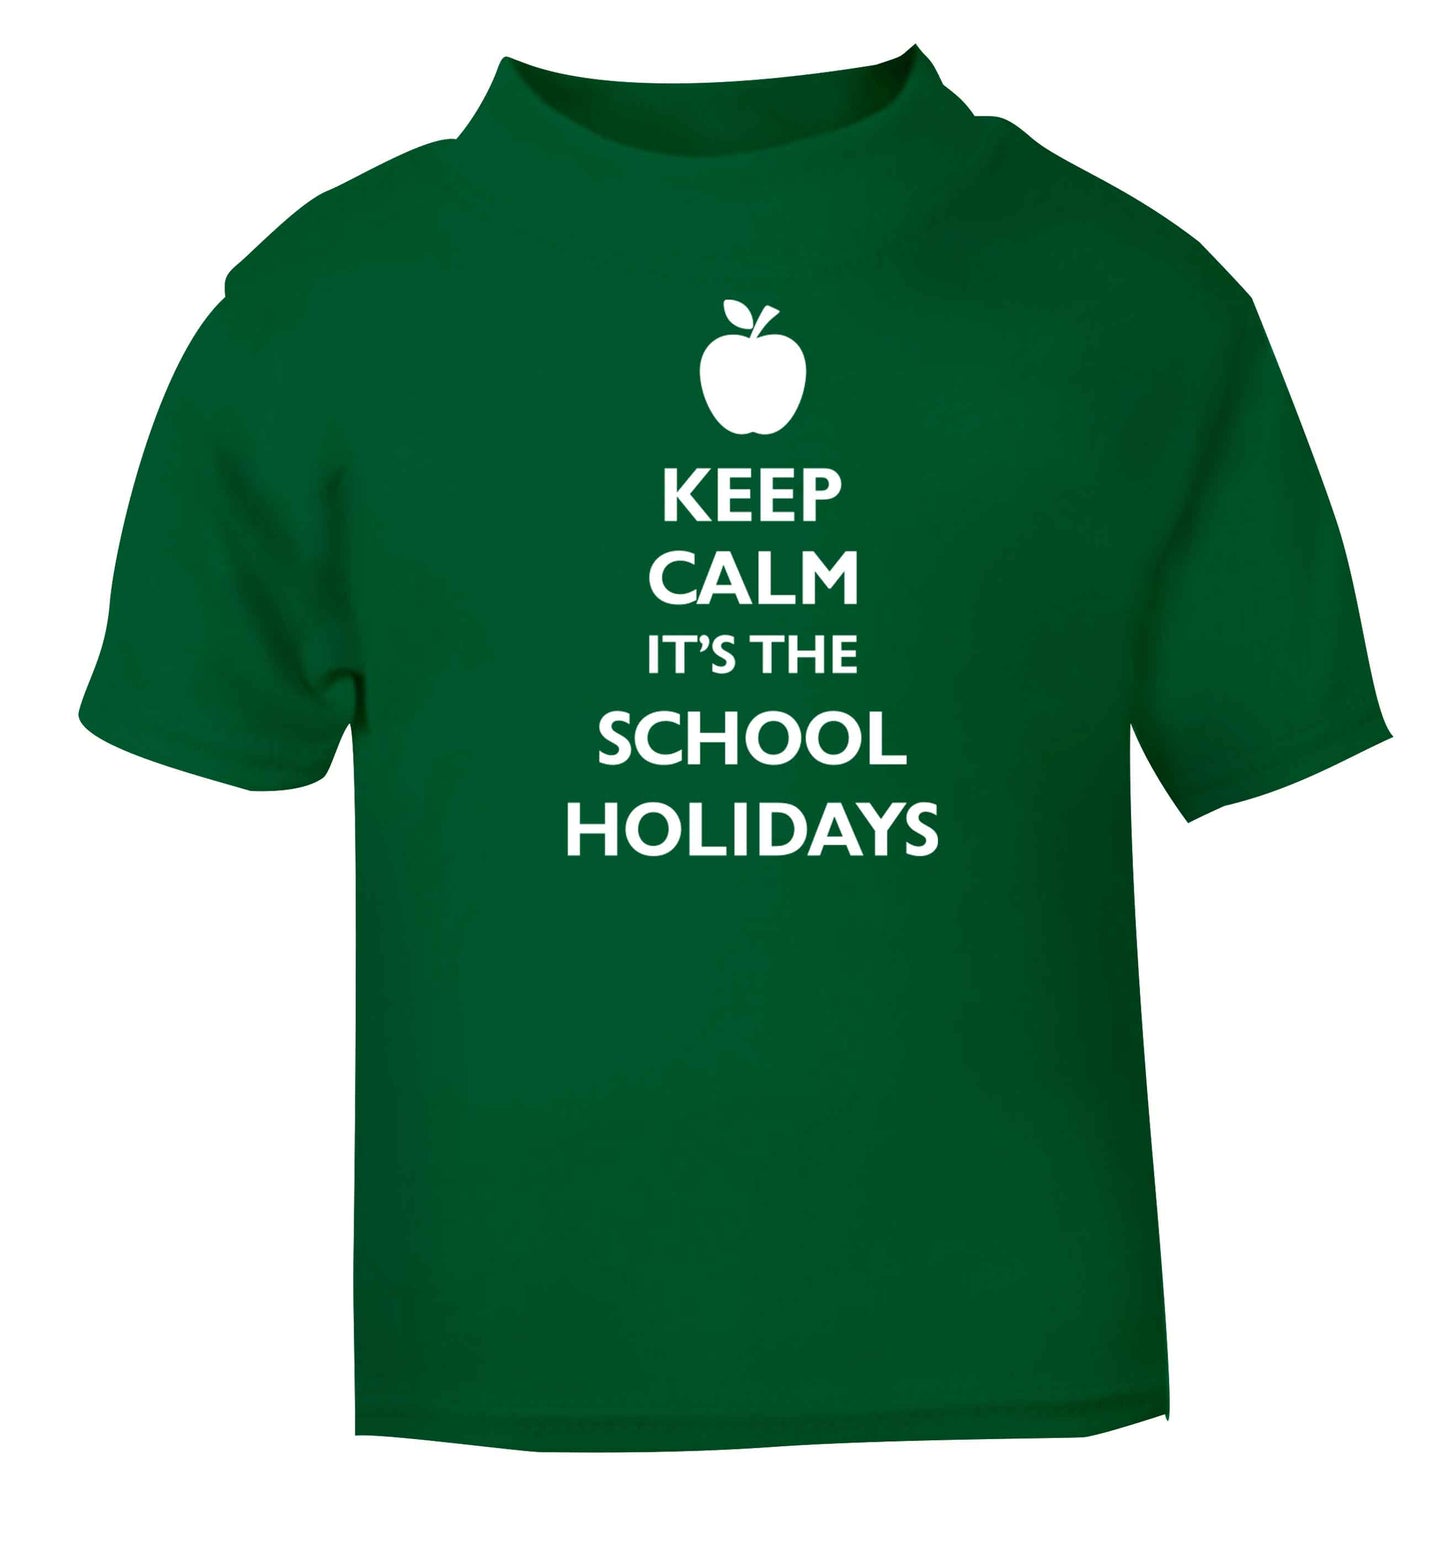 Keep calm it's the school holidays green baby toddler Tshirt 2 Years